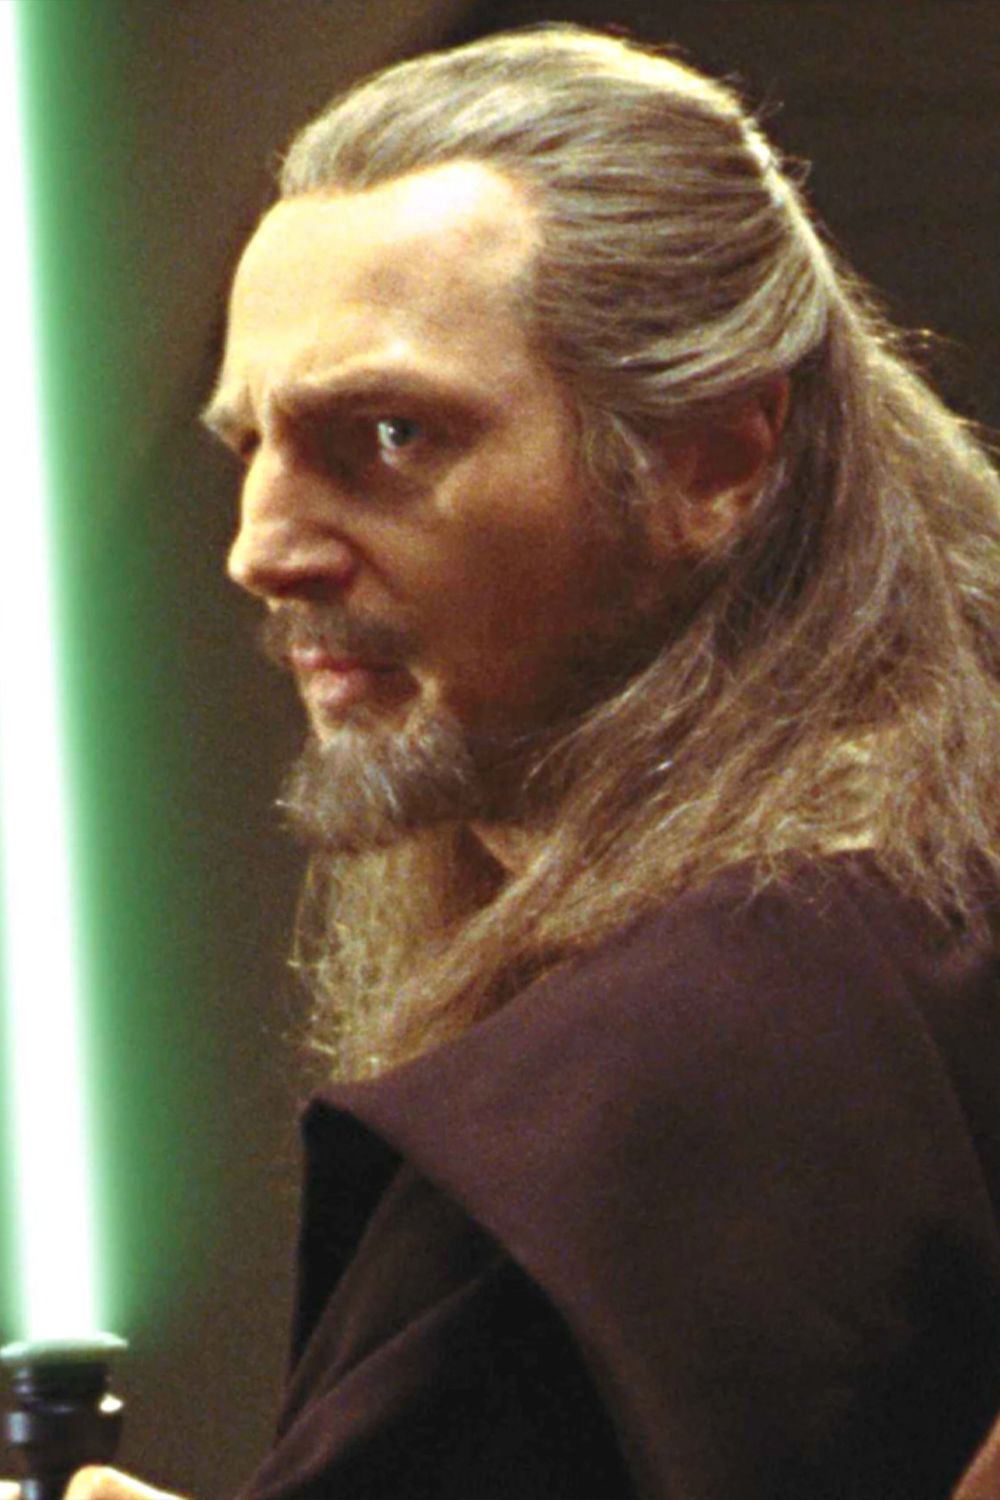 Liam Neeson Rules Out Qui-Gon Jinn’s Live-Action Star Wars Return – But There’s Still A Way He Could Be Back